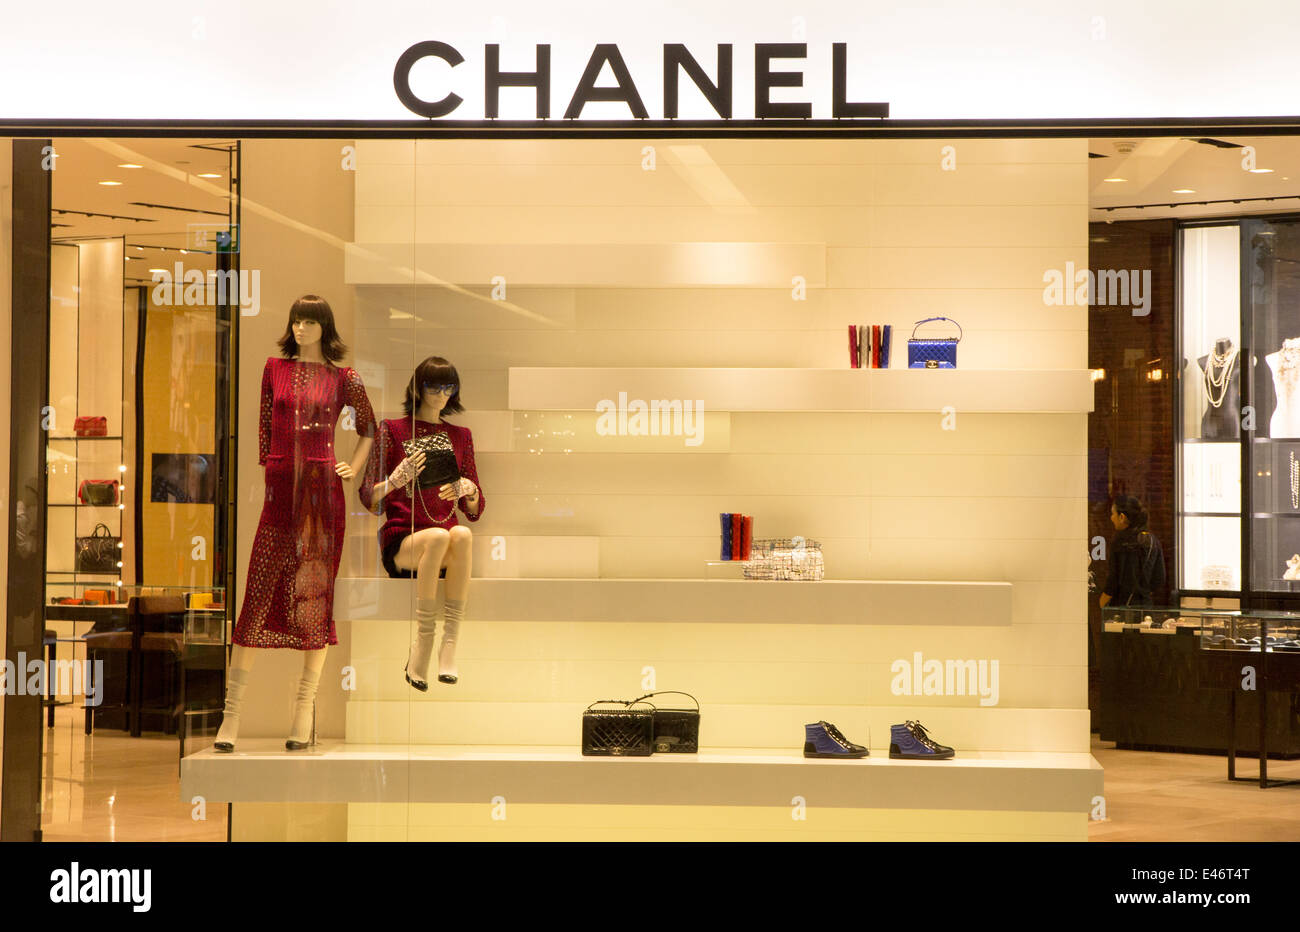 chanel usa online store